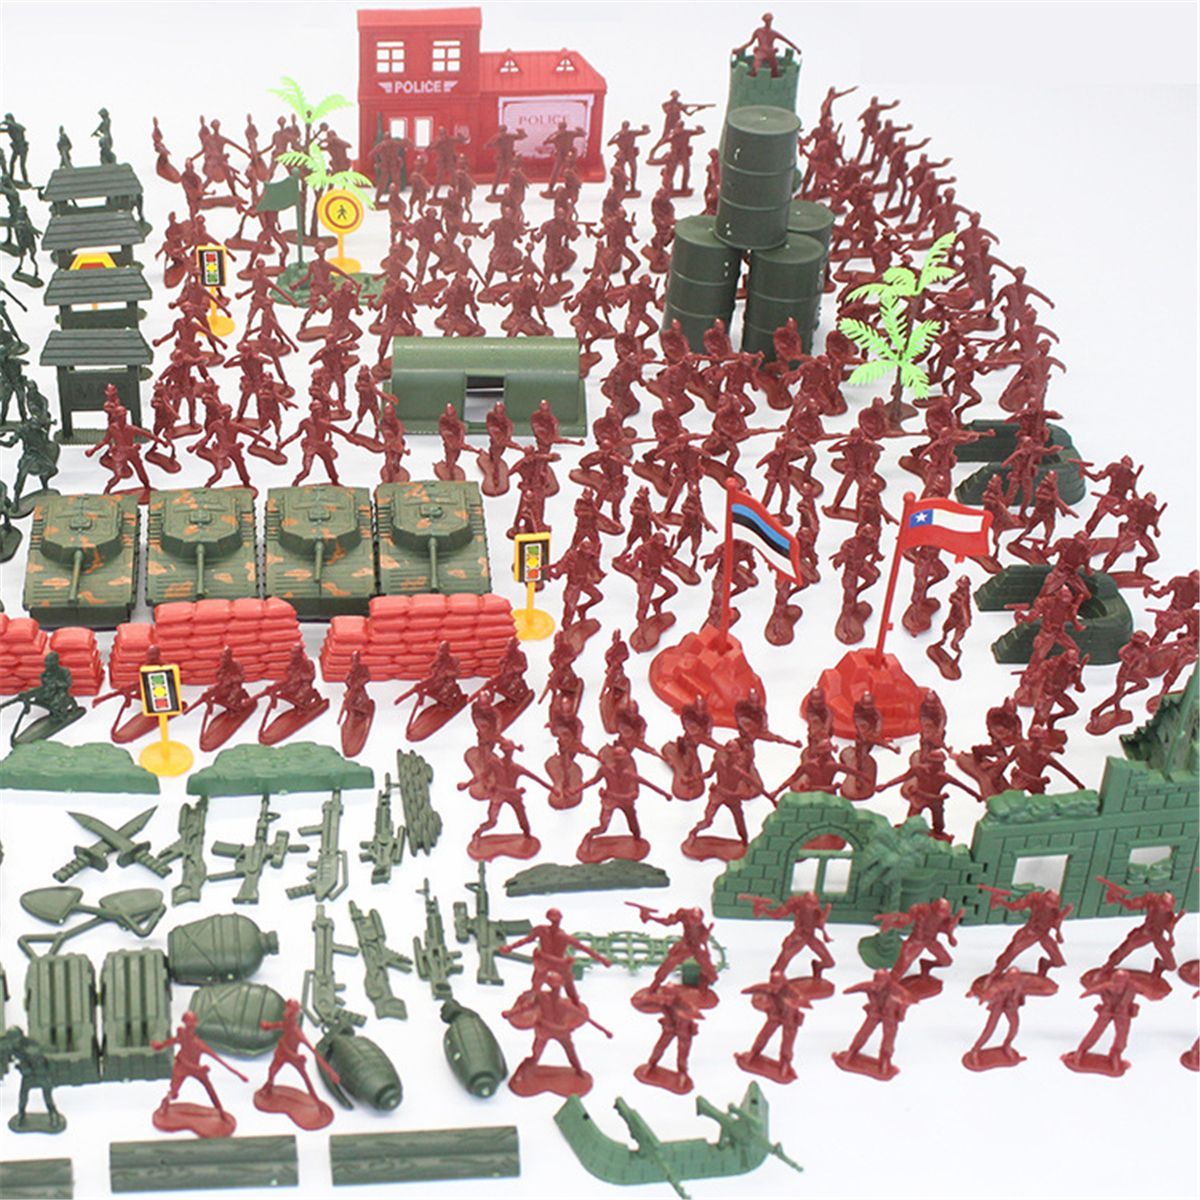 330pcs-Military-Plastic-Model-Playset-Toy-Soldiers-Figures-amp-Accessories-Kid-Toys-1472907